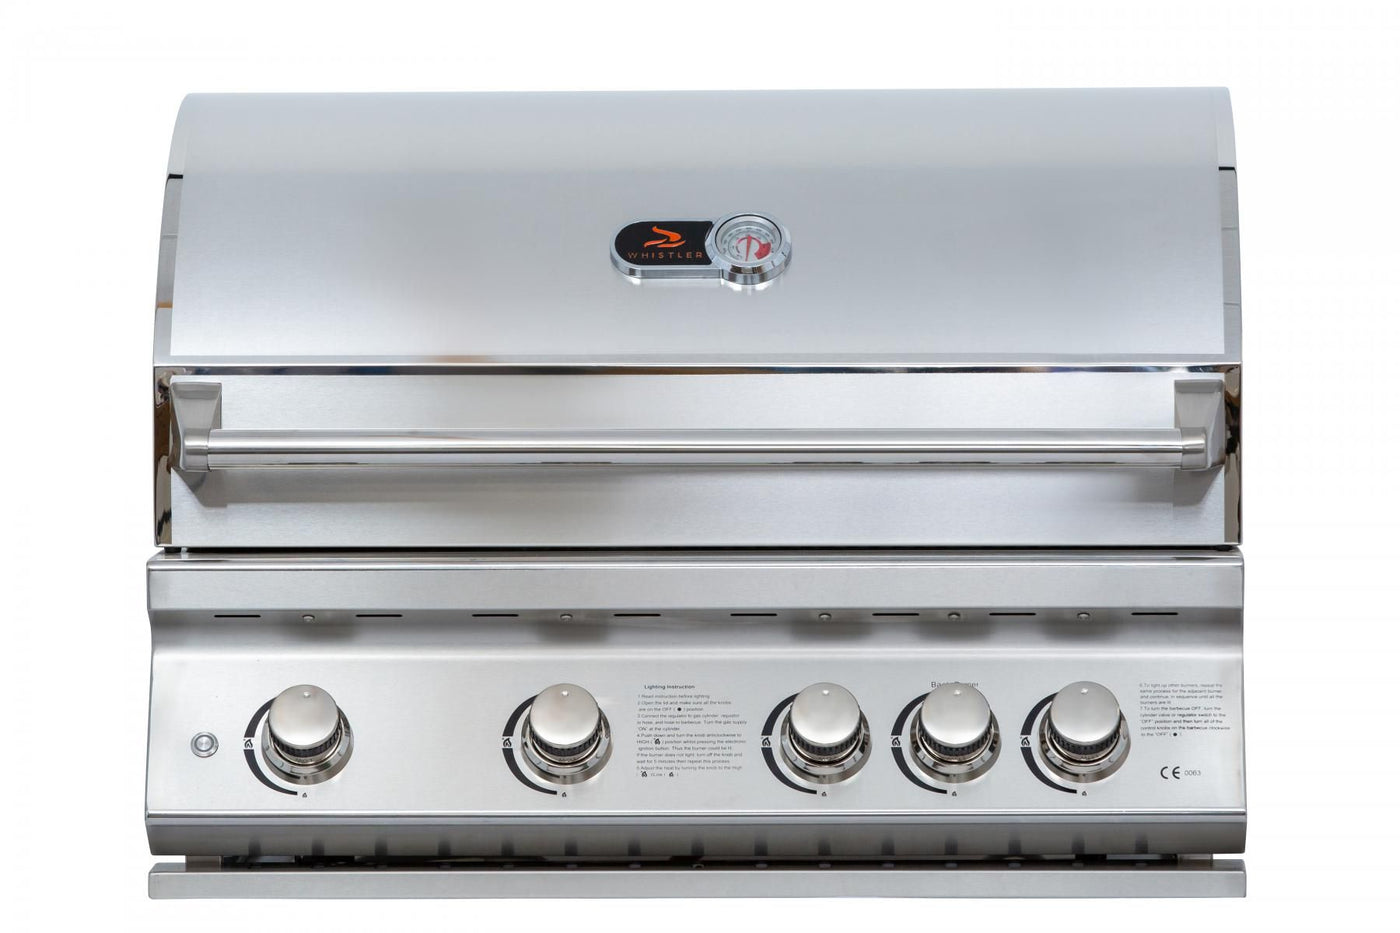 Whistler Burford 4 Burner Built In Gas Barbecue. With FREE Cover and rotisserie kit. Now only £1669